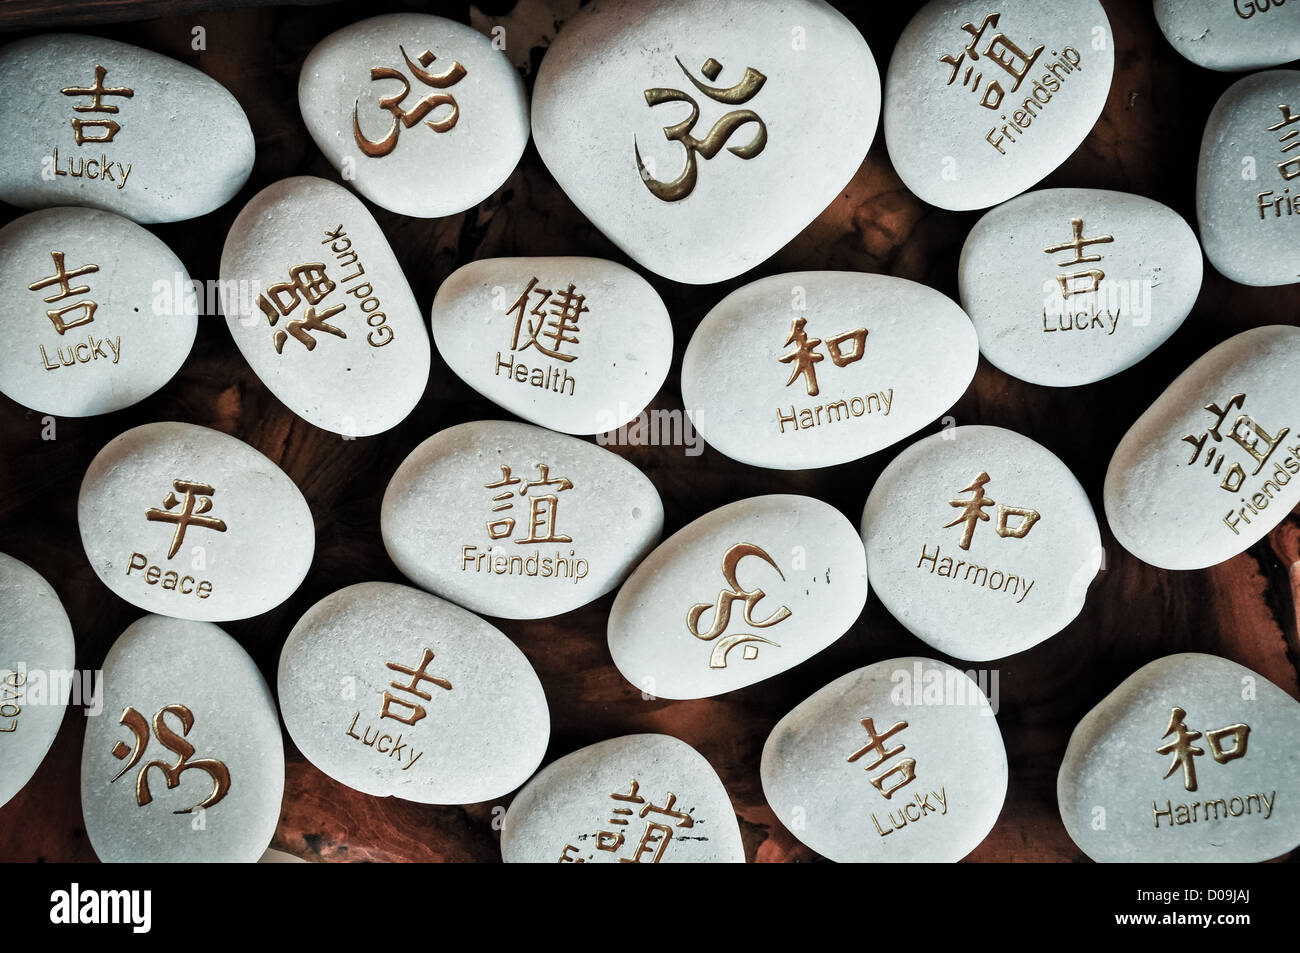 Fortune stones with carved symbols Stock Photo